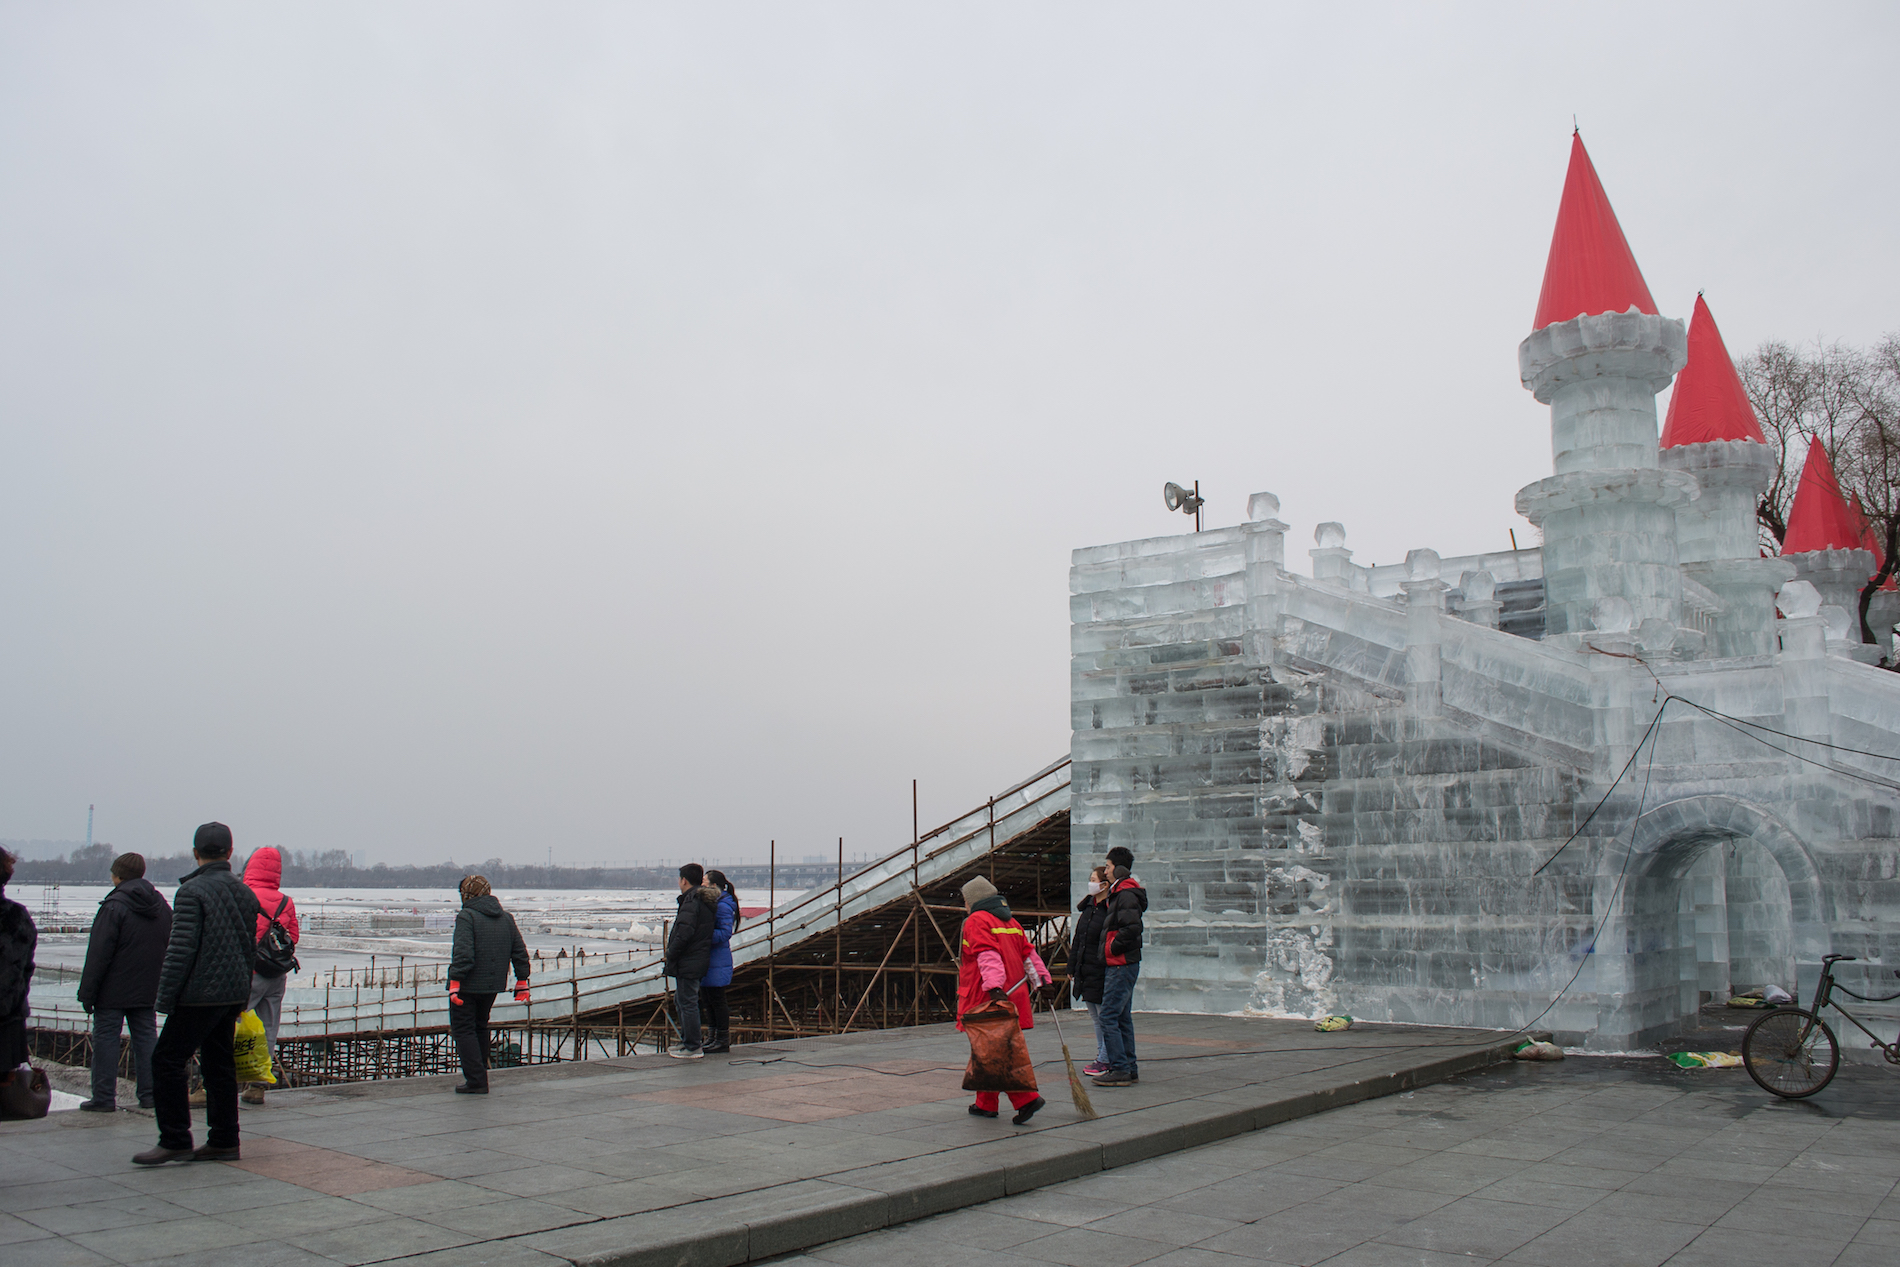 Ice slide going down to the Songhua River.